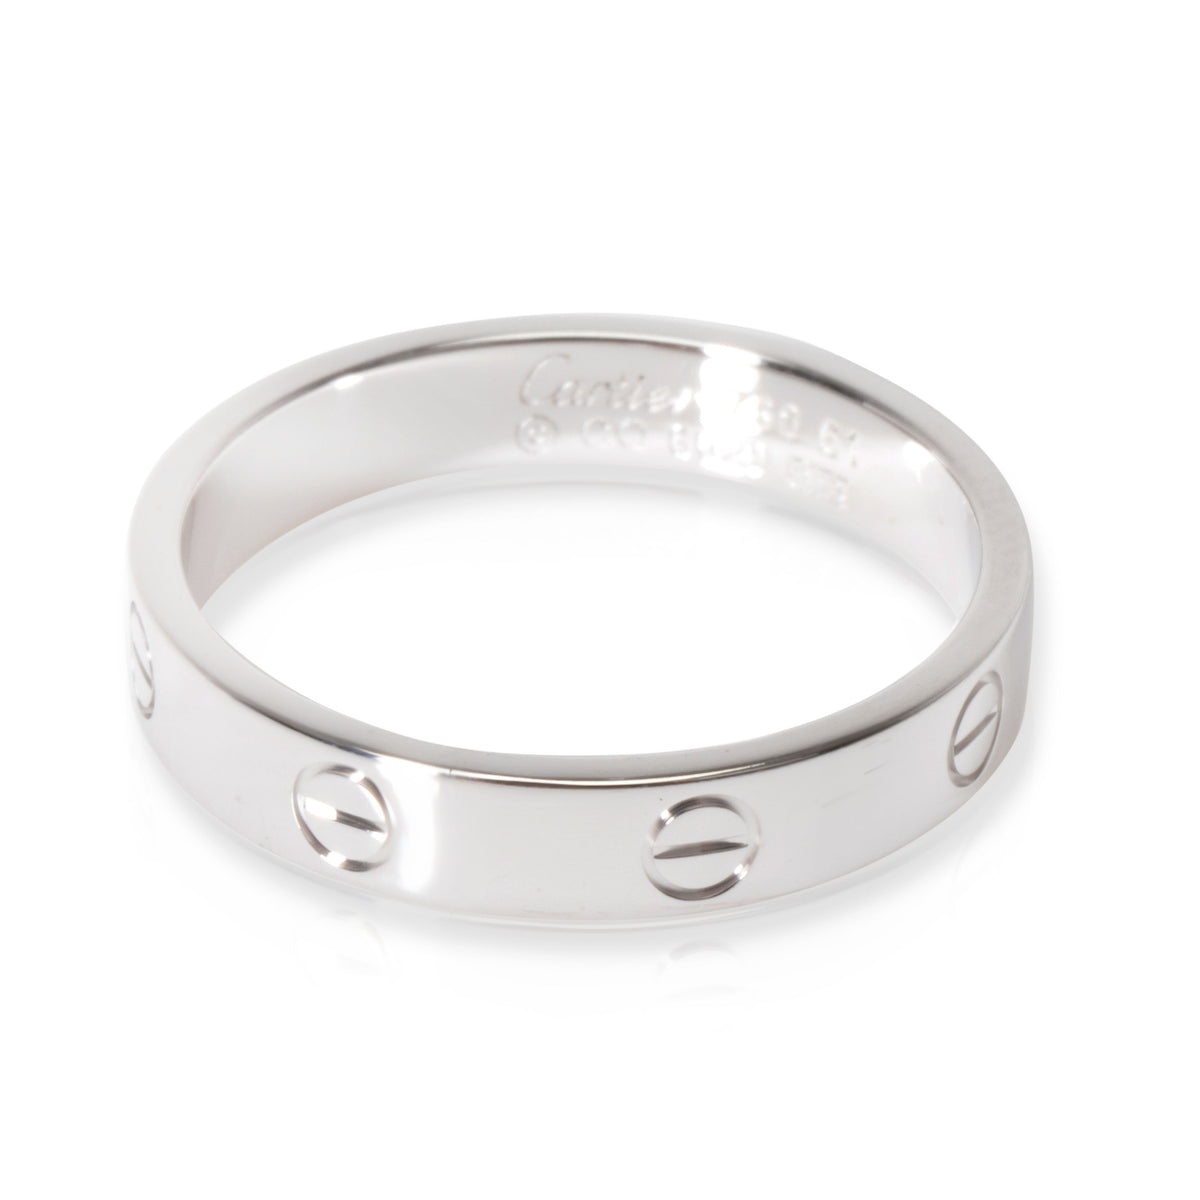 Cartier Love Ring in 18K White Gold 4mm Size 61